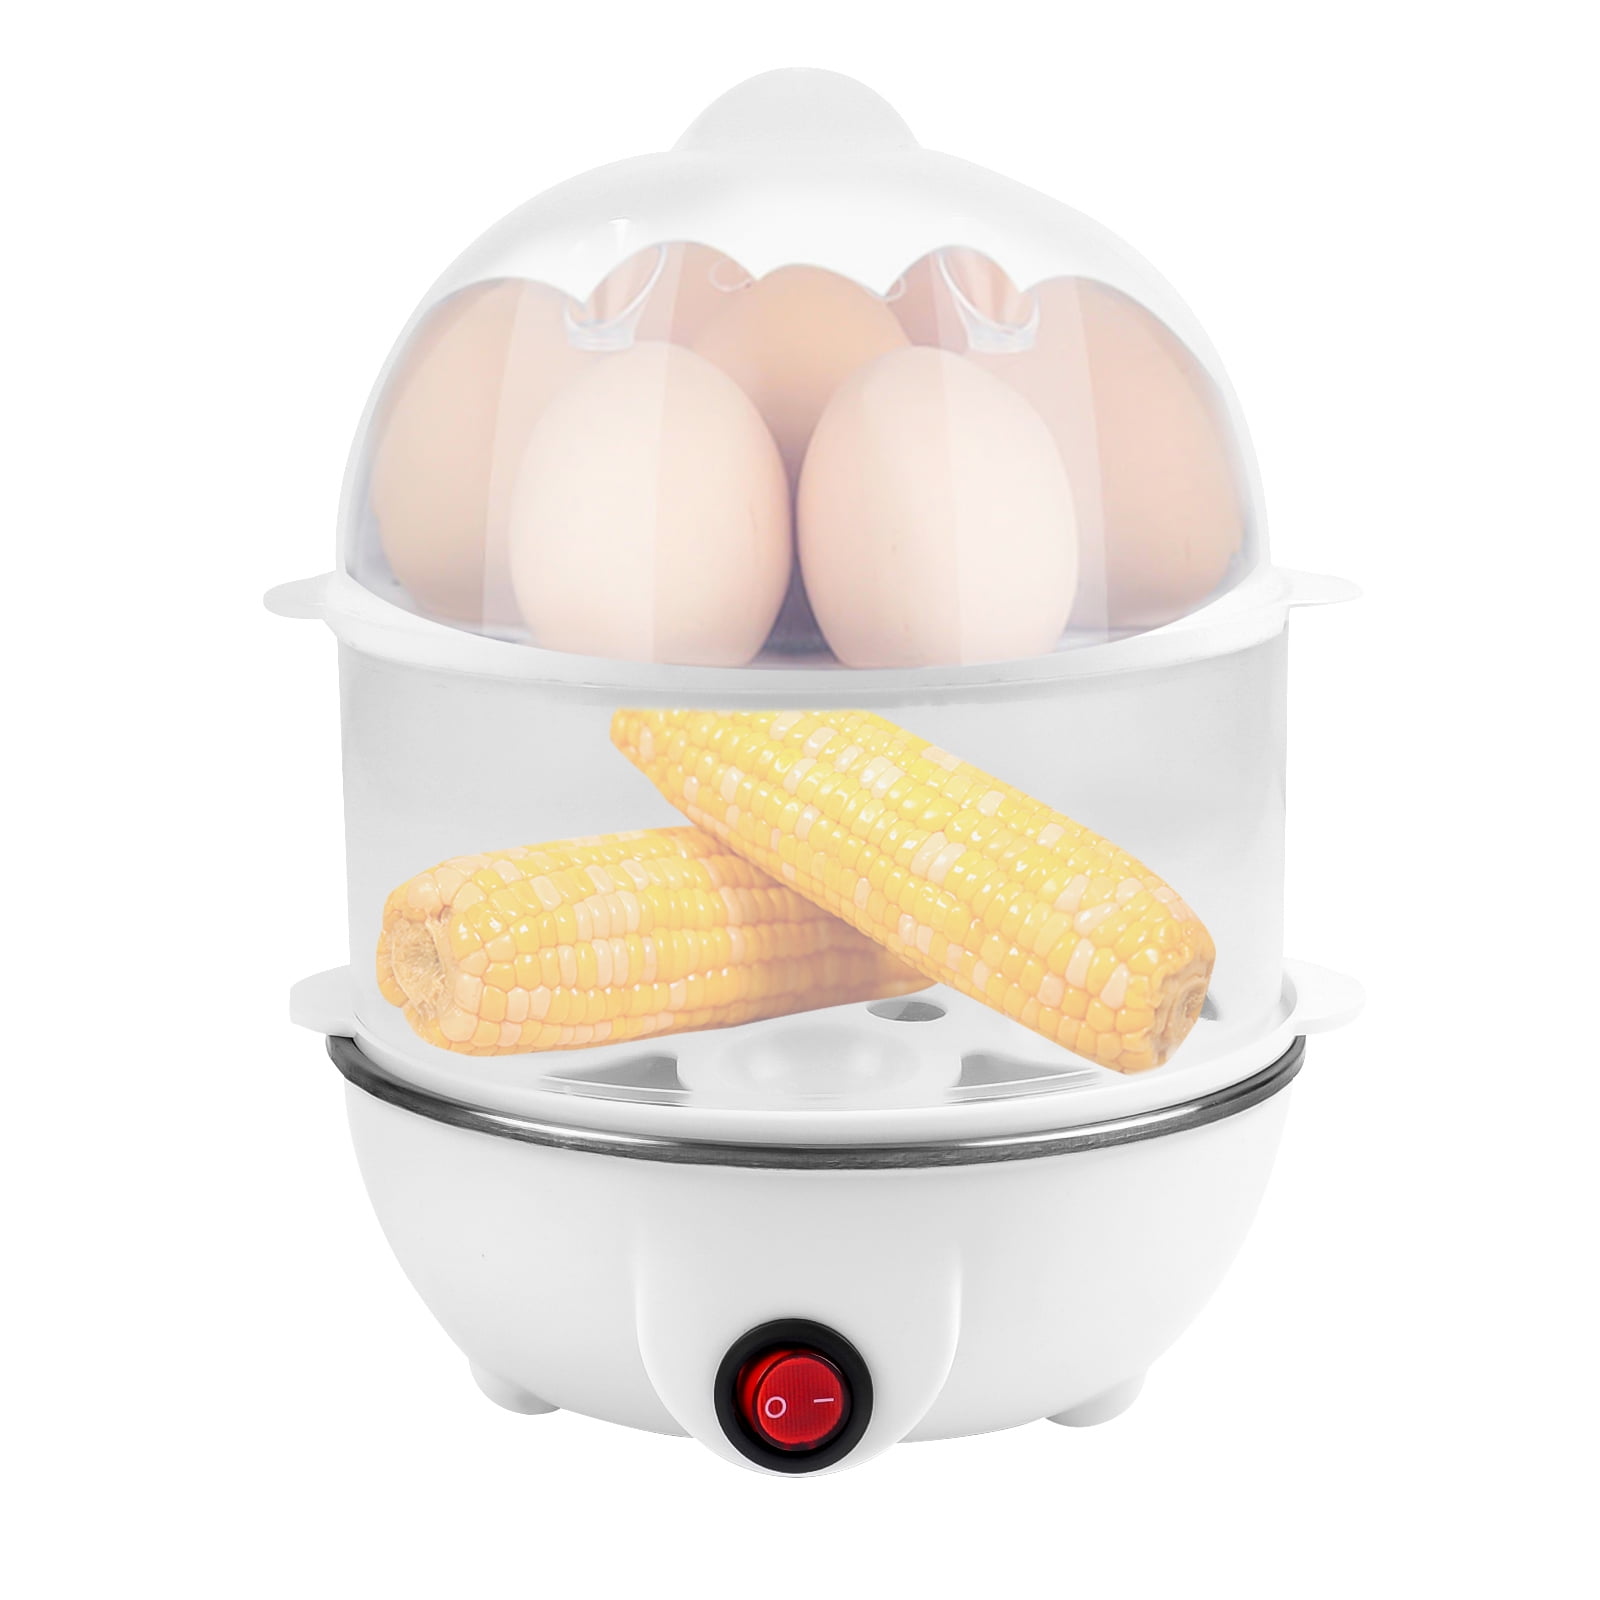 Electric Egg Cooker,4 Egg Capacity,Hard-Boiled Egg Cooker with Auto  Shut-Off Rapid Electric Poacher for Hard Boiled Eggs, Poacher, Omelet Maker  